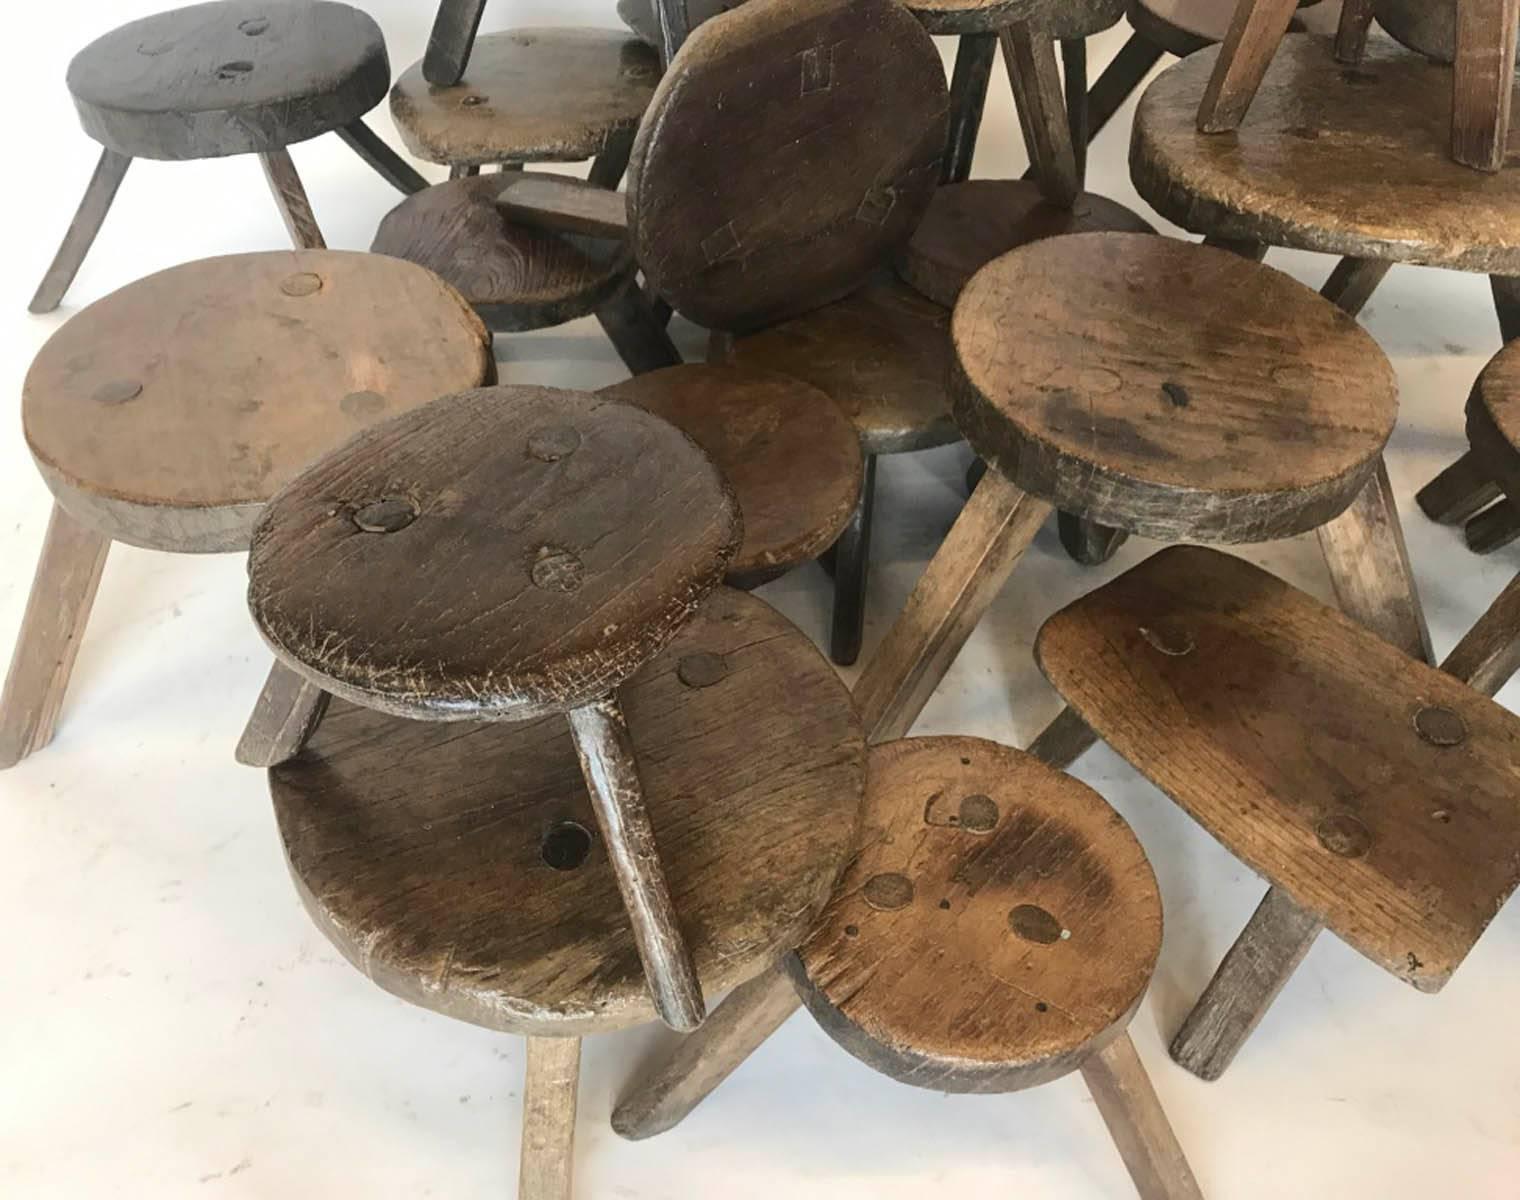 A collection of antique, 19th century wooden milking stools in various sizes. Price varies, from $255 - 550 each. Approximate sizes are 9 D x 7 H to 13 D x 10 H. Smooth, naturally worn patina on all of them. Three legs.